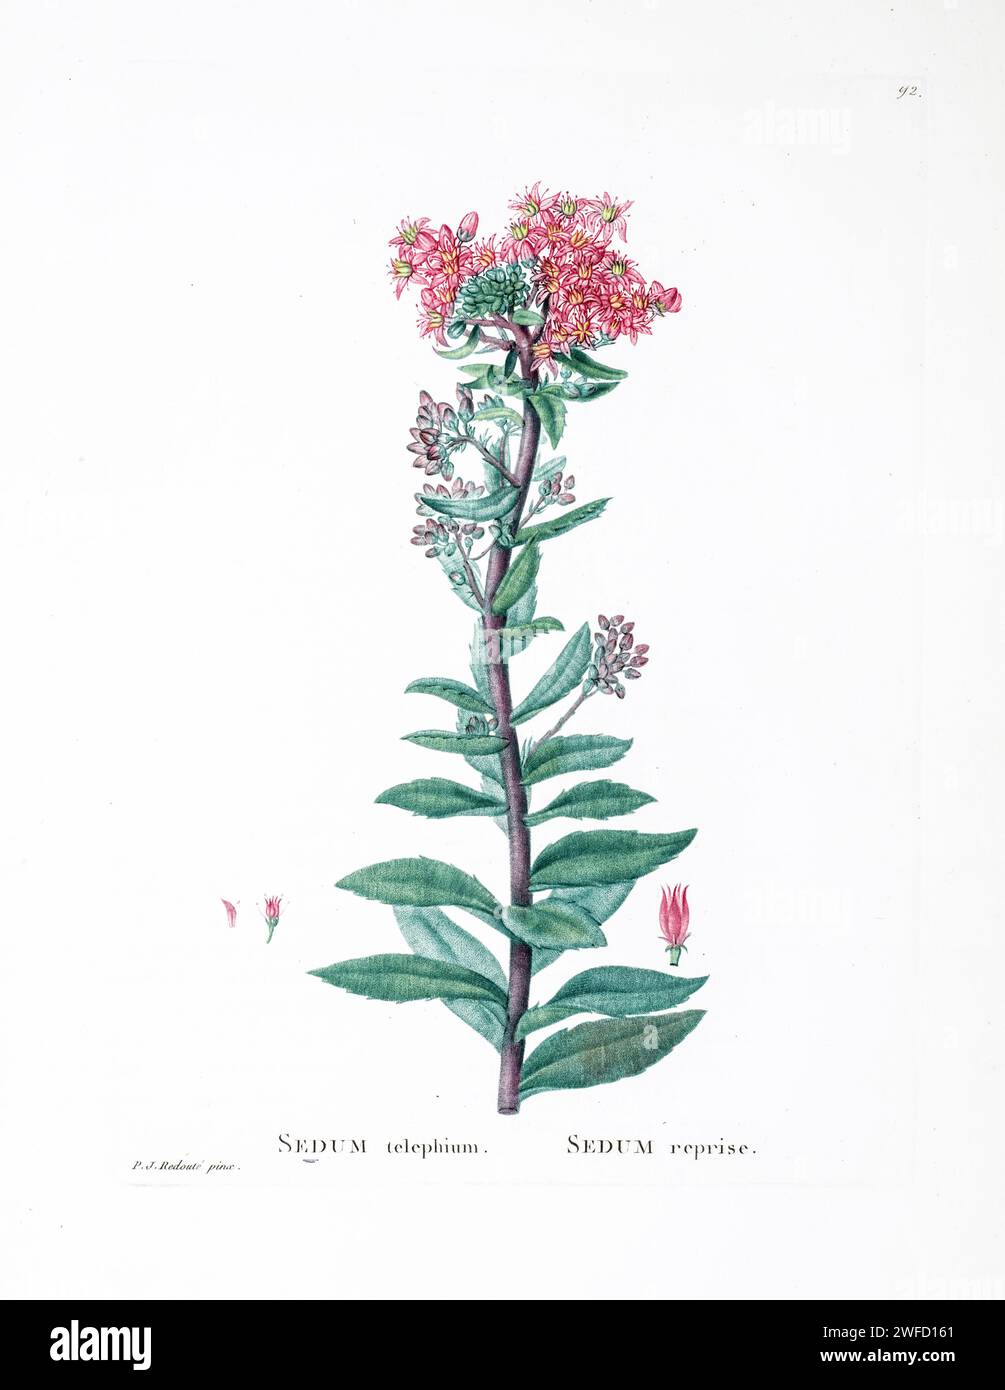 Sedum telephium from History of Succulent Plants [Plantarum historia succulentarum / Histoire des plantes grasses] painted by Pierre-Joseph Redouté and described by Augustin Pyramus de Candolle 1799 Hylotelephium telephium, known as orpine, livelong, frog's-stomach, harping Johnny, life-everlasting, live-forever, midsummer-men, Orphan John and witch's moneybags, is a succulent perennial groundcover of the family Crassulaceae native to Eurasia. The flowers are held in dense heads and can be reddish or yellowish Stock Photo